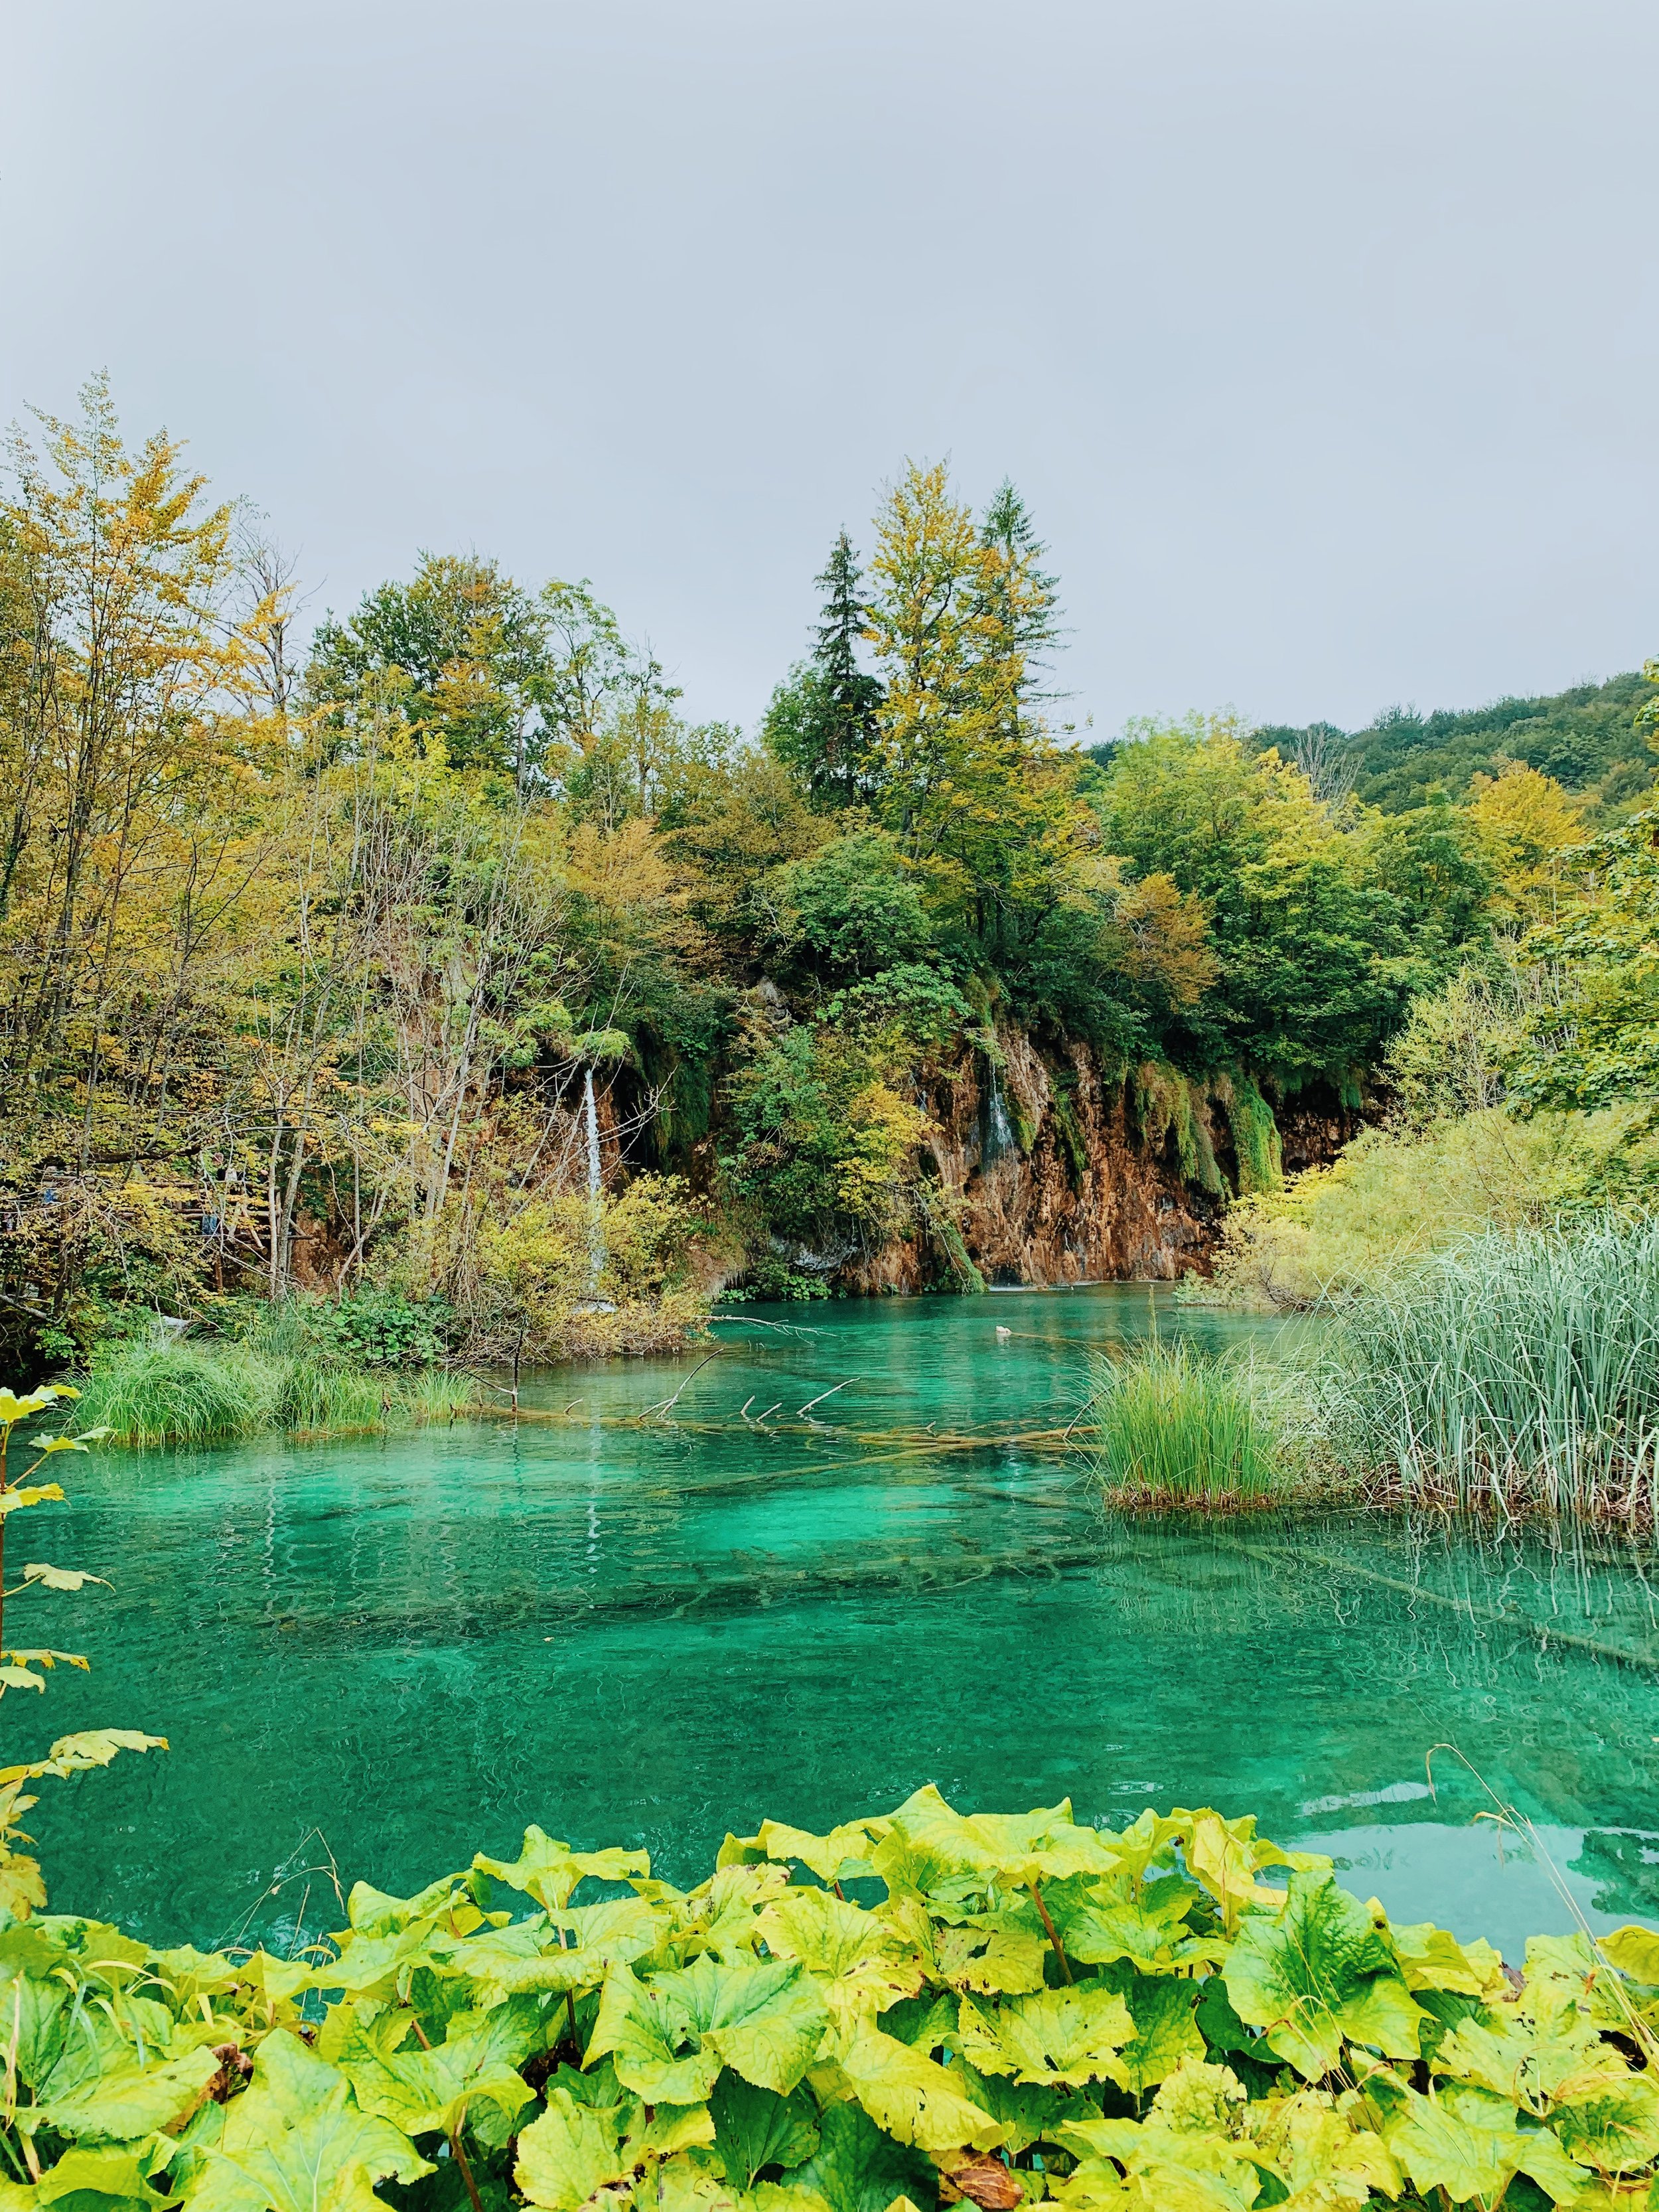 How to visit Plitvice Lakes